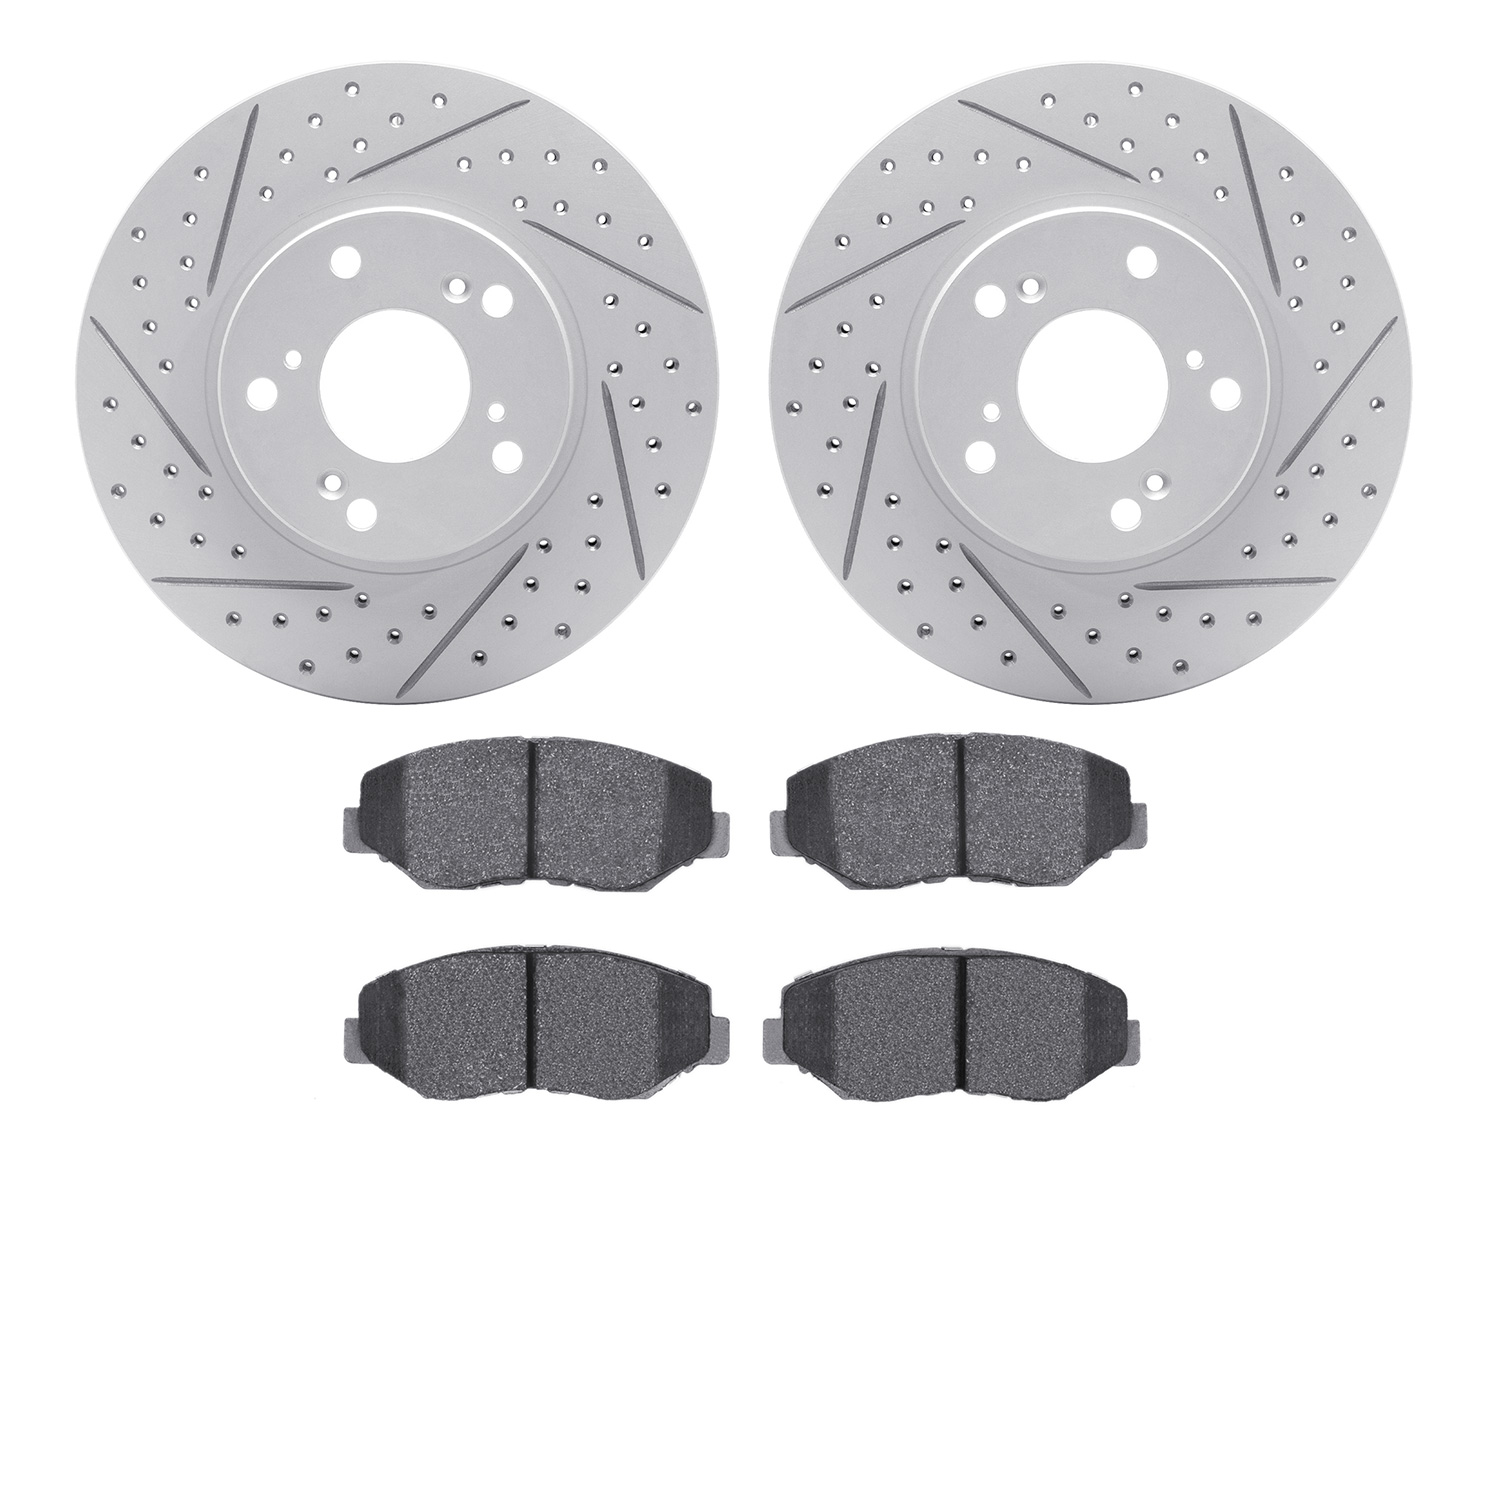 2502-59065 Geoperformance Drilled/Slotted Rotors w/5000 Advanced Brake Pads Kit, 2002-2015 Acura/Honda, Position: Front